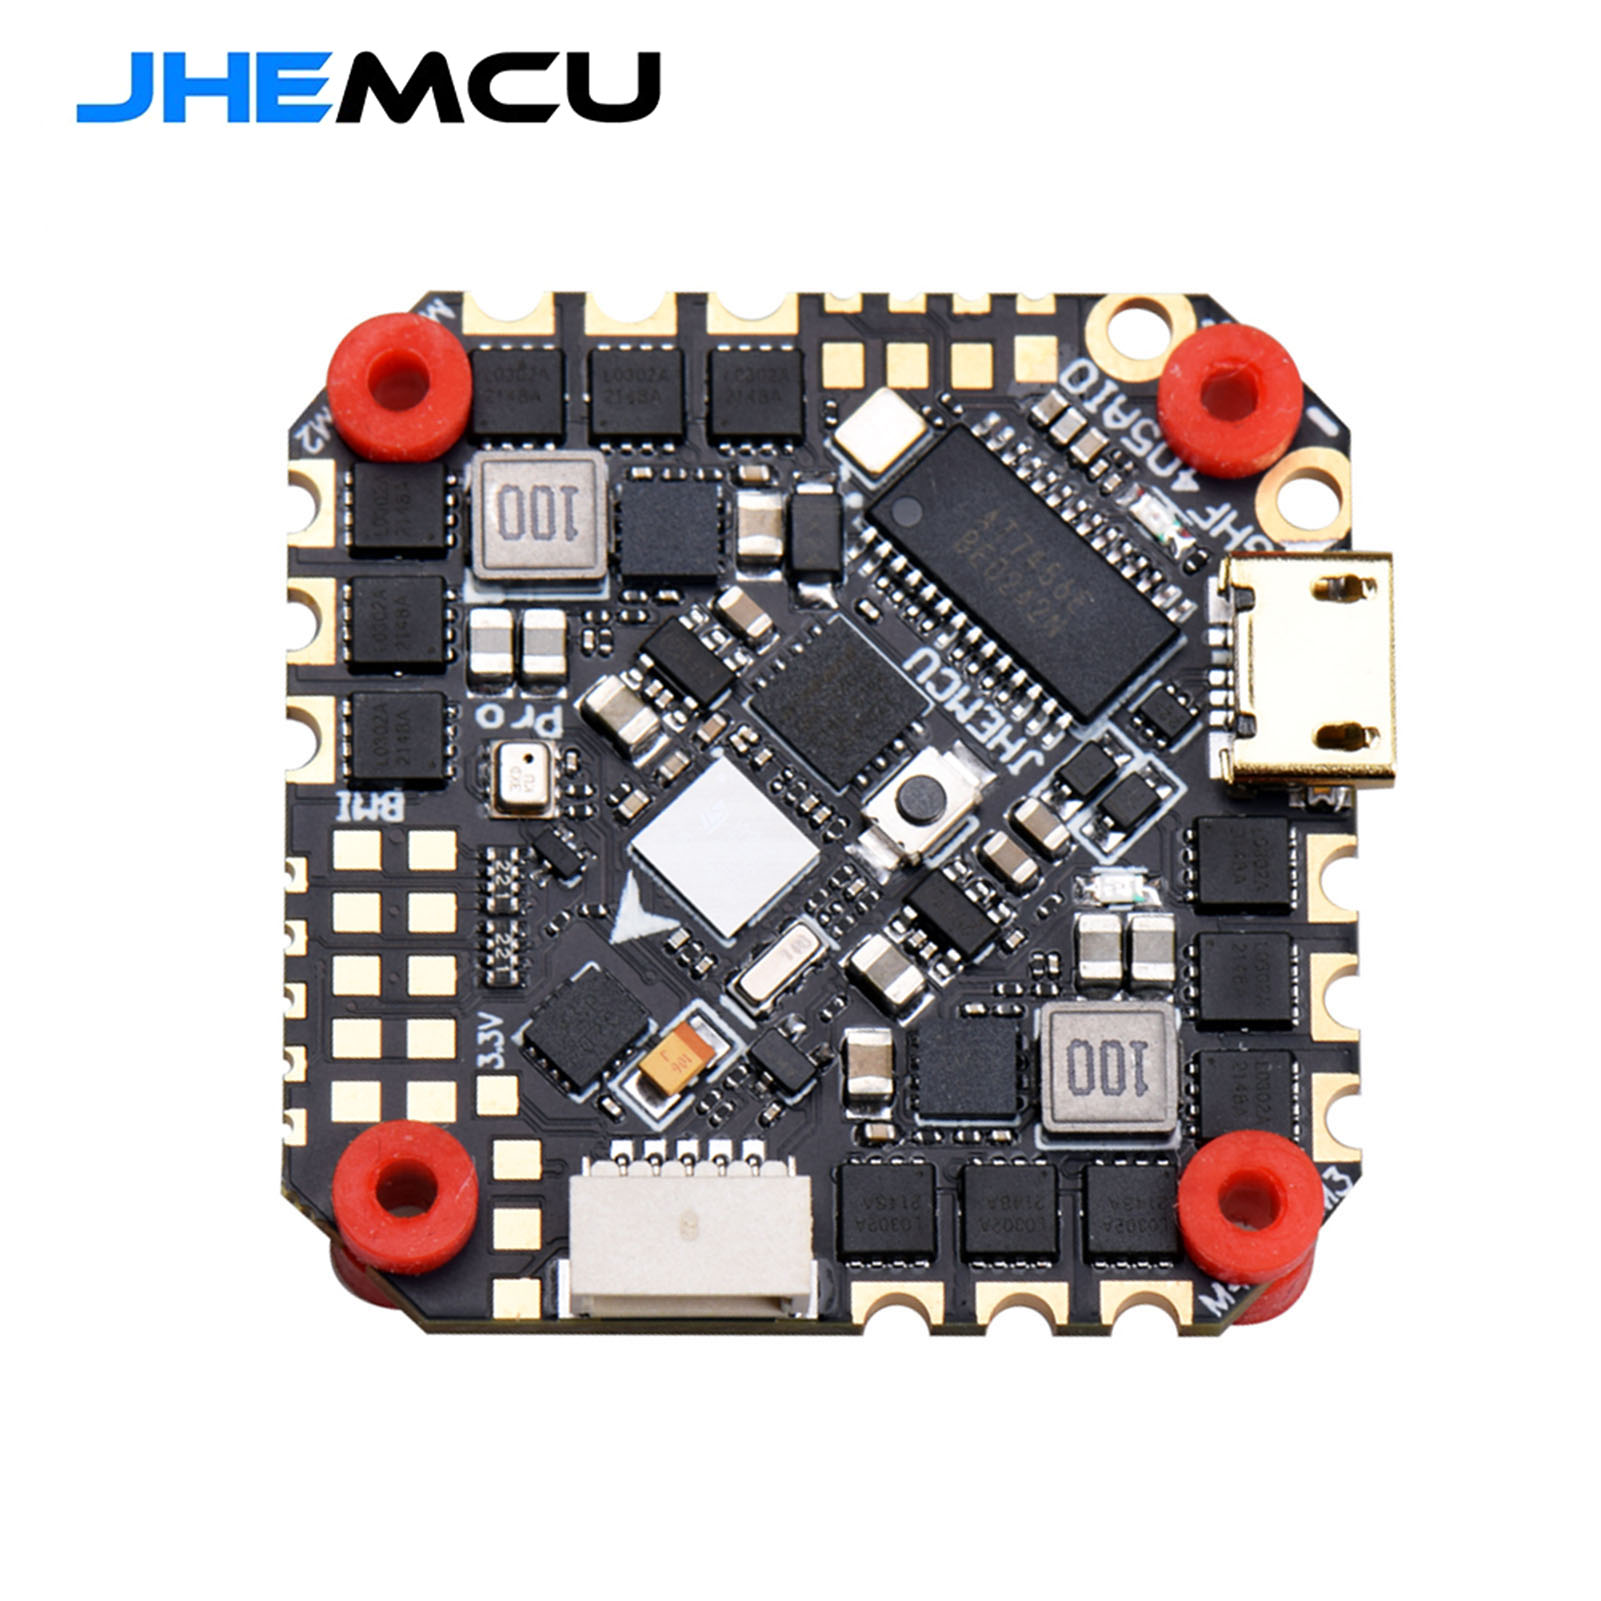 JHEMCU GHF405AIO-BMI F405 Flight Controller W5V 10V BEC Built-in 40A BLHELI_S 2-6S 4 in 1 ESC 25.5X25.5mm for - image 3 of 7